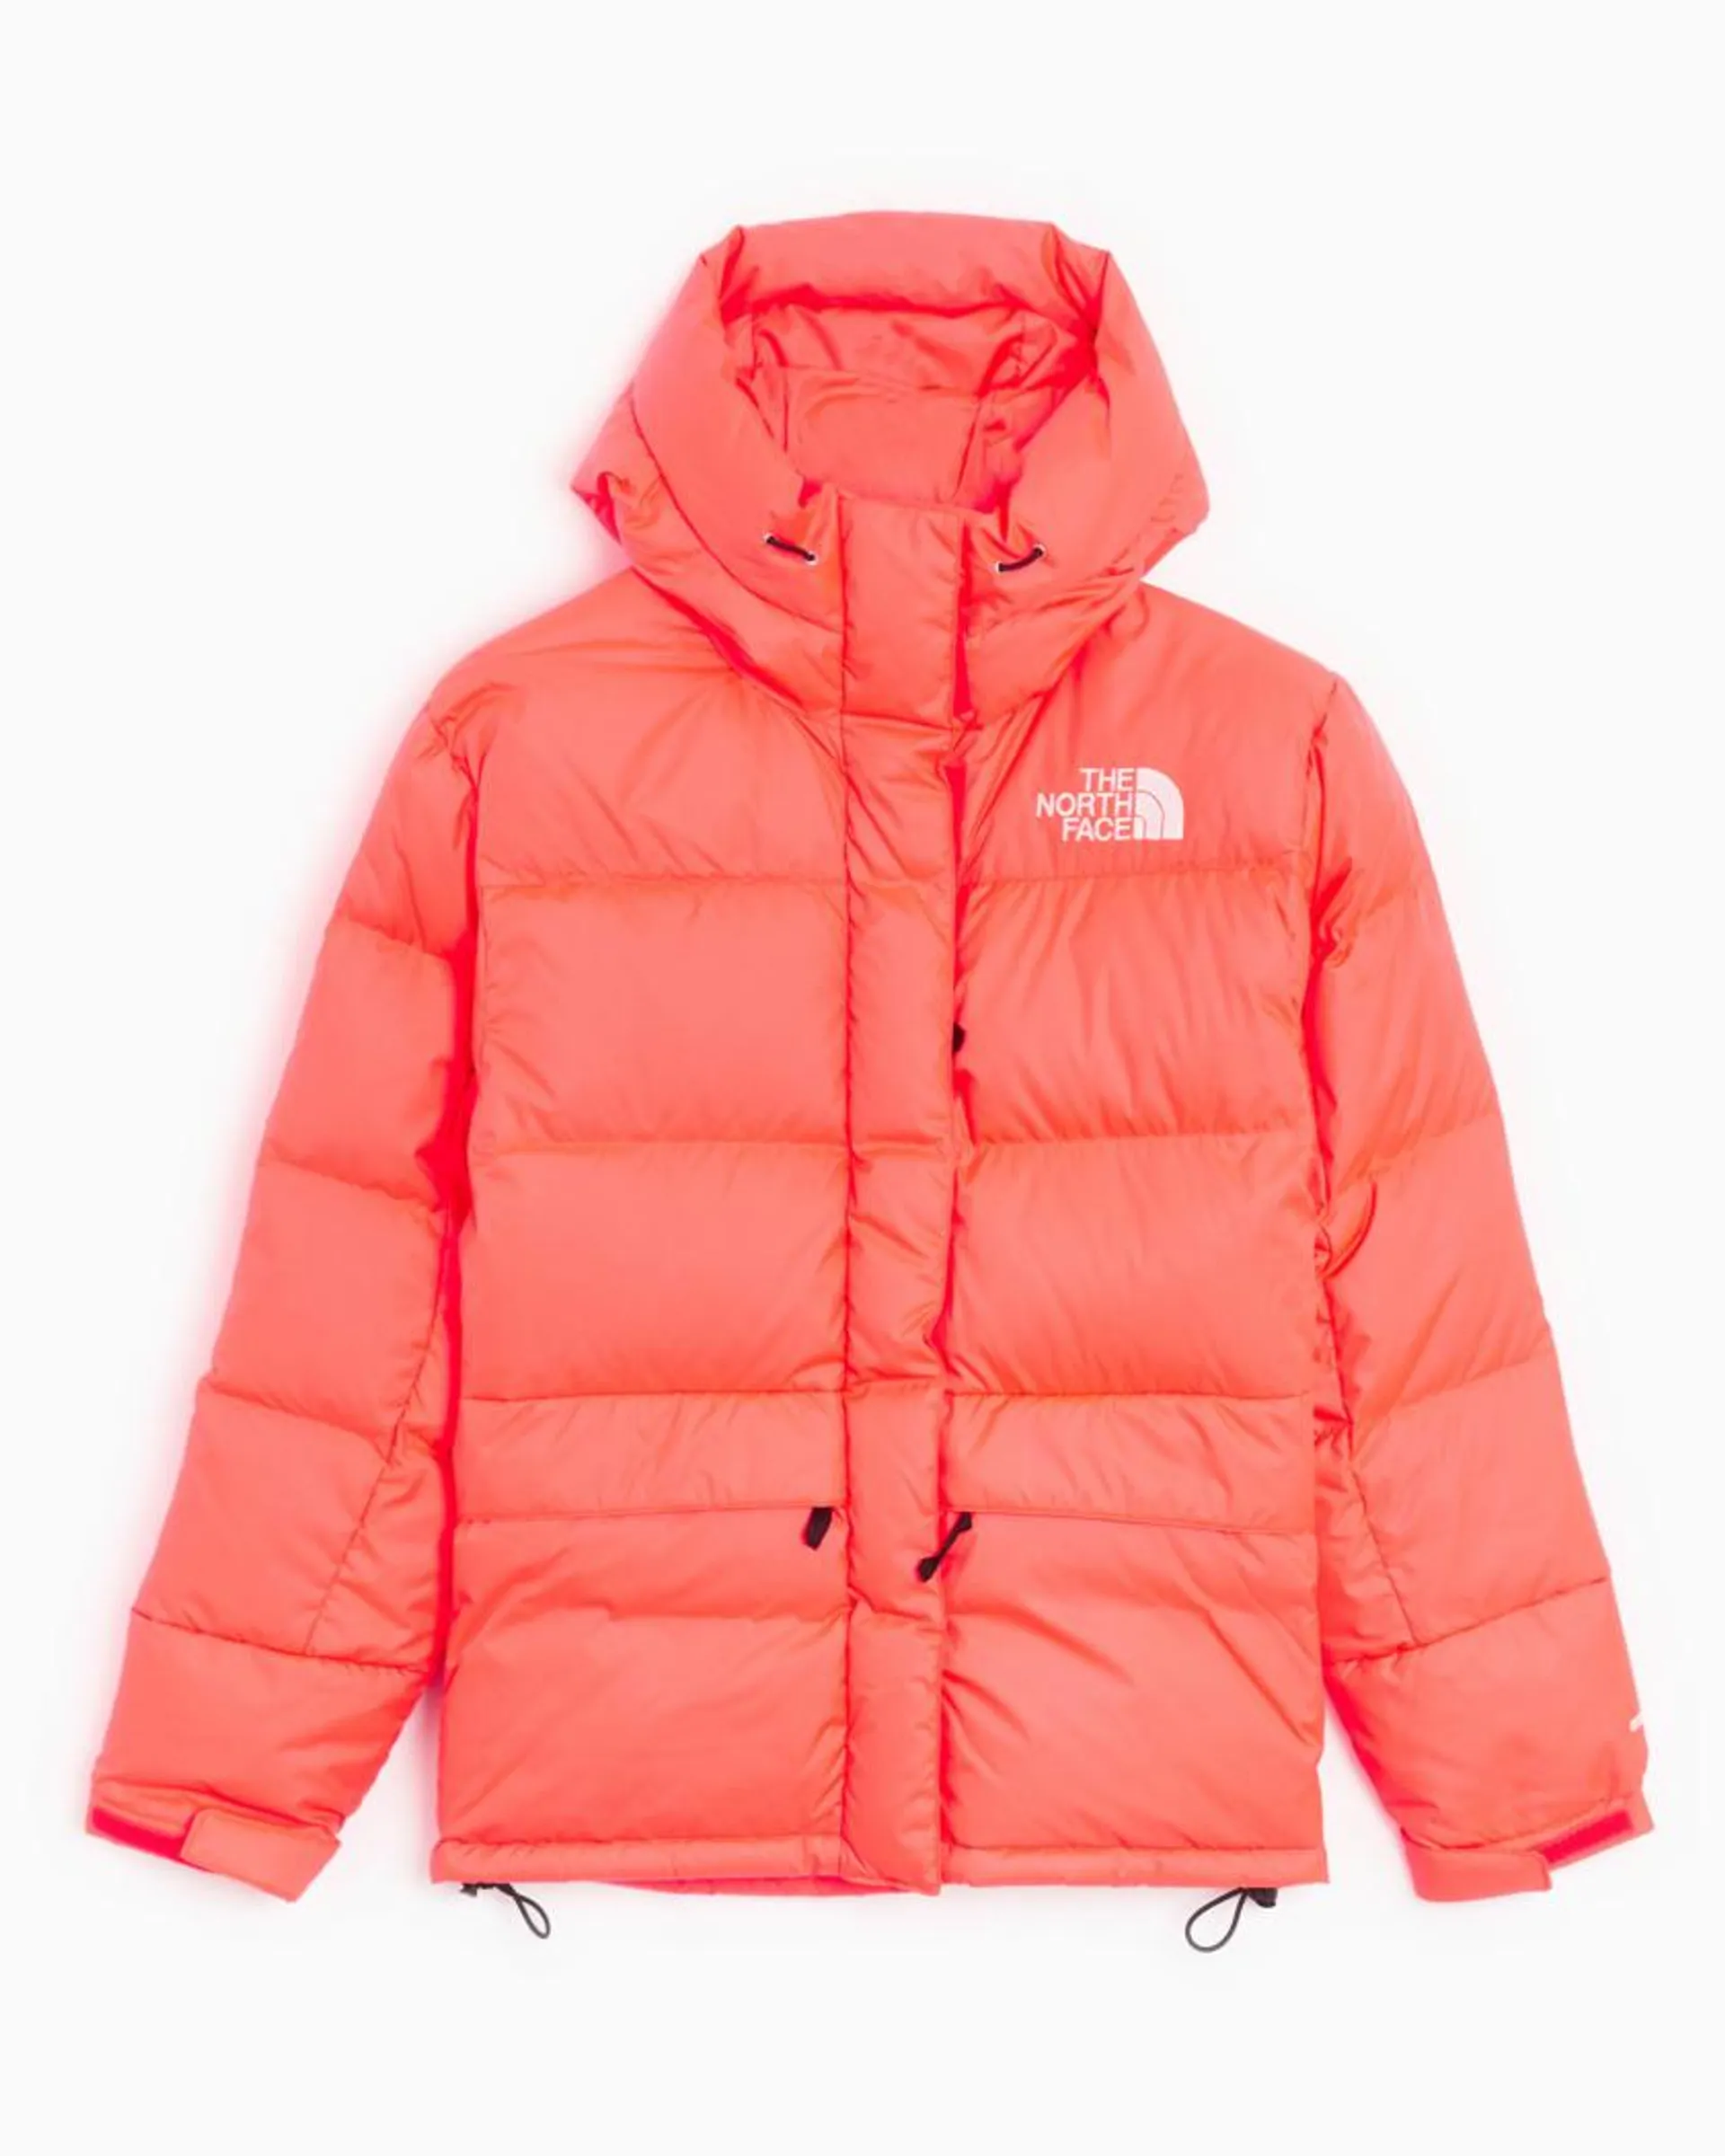 The North Face Himalayan Women's Down Jacket